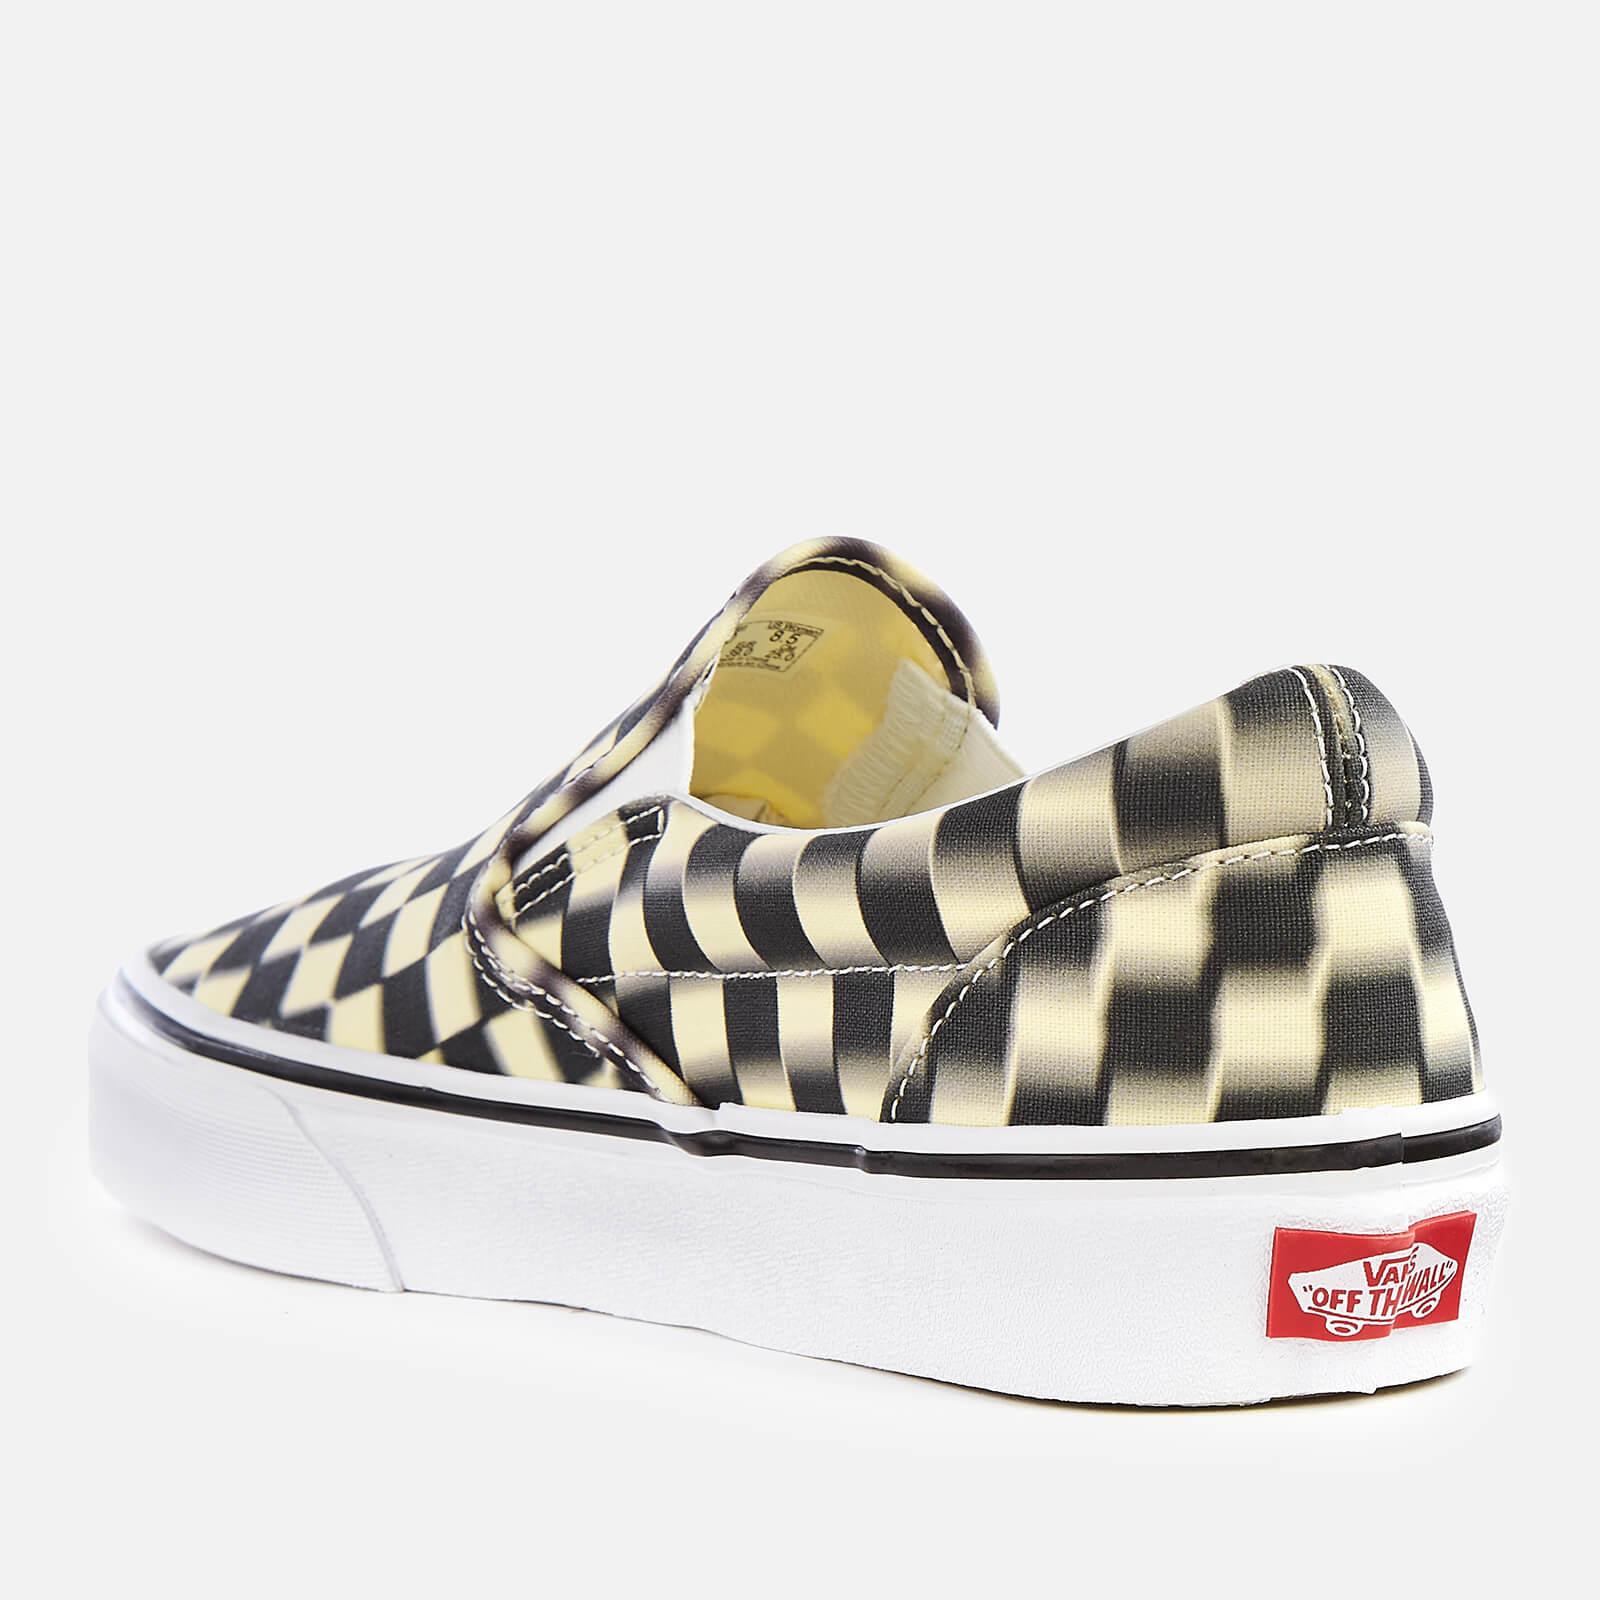 Vans Canvas Blur Check Classic Slip-on Trainers for Men - Lyst